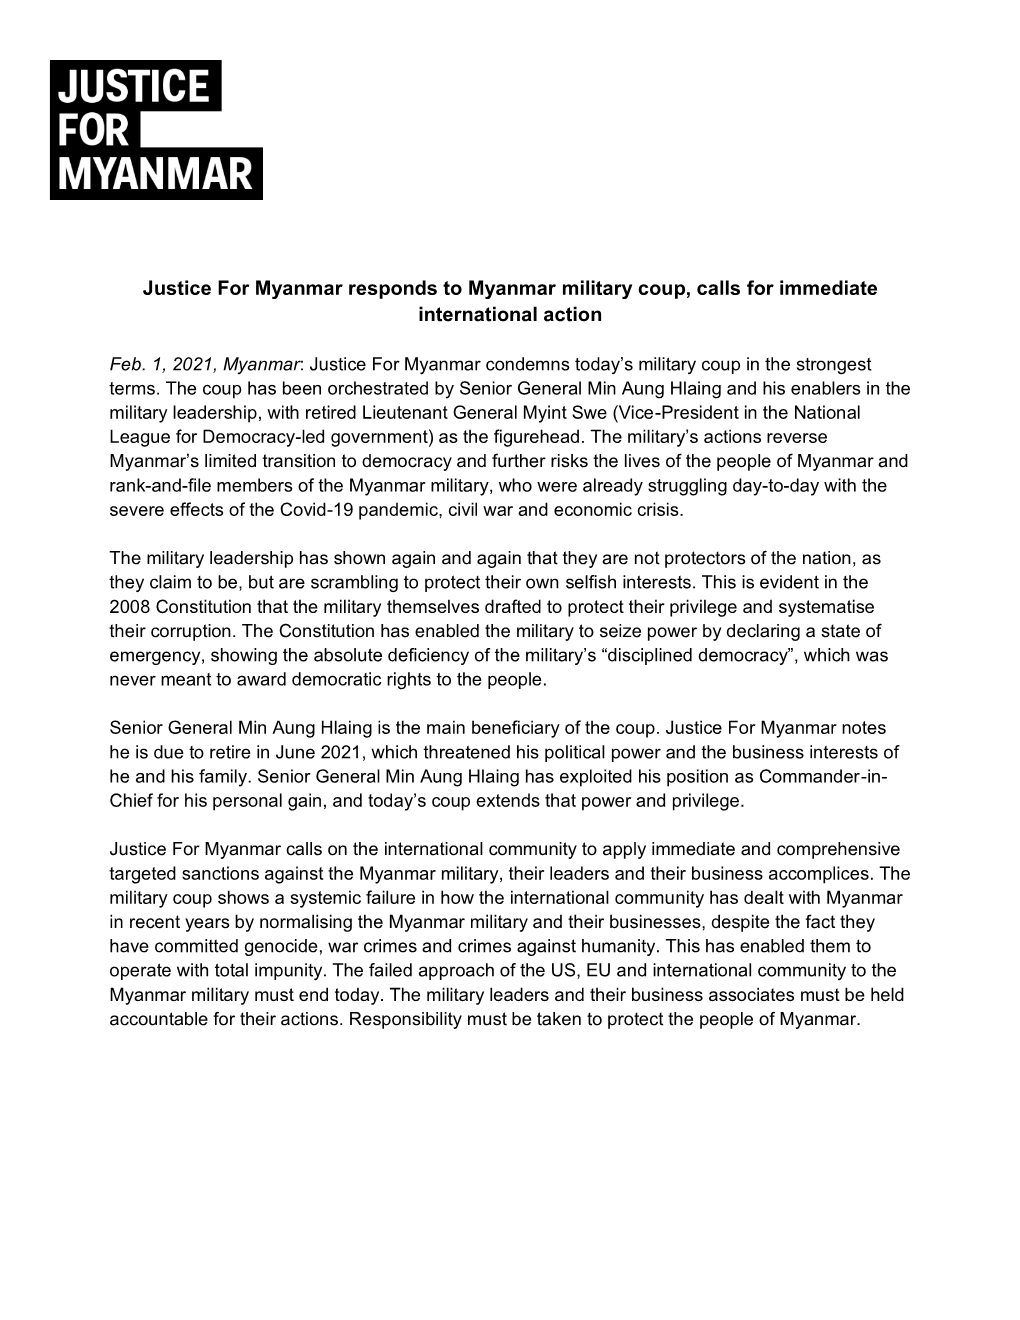 Justice for Myanmar Responds to Myanmar Military Coup, Calls for Immediate International Action